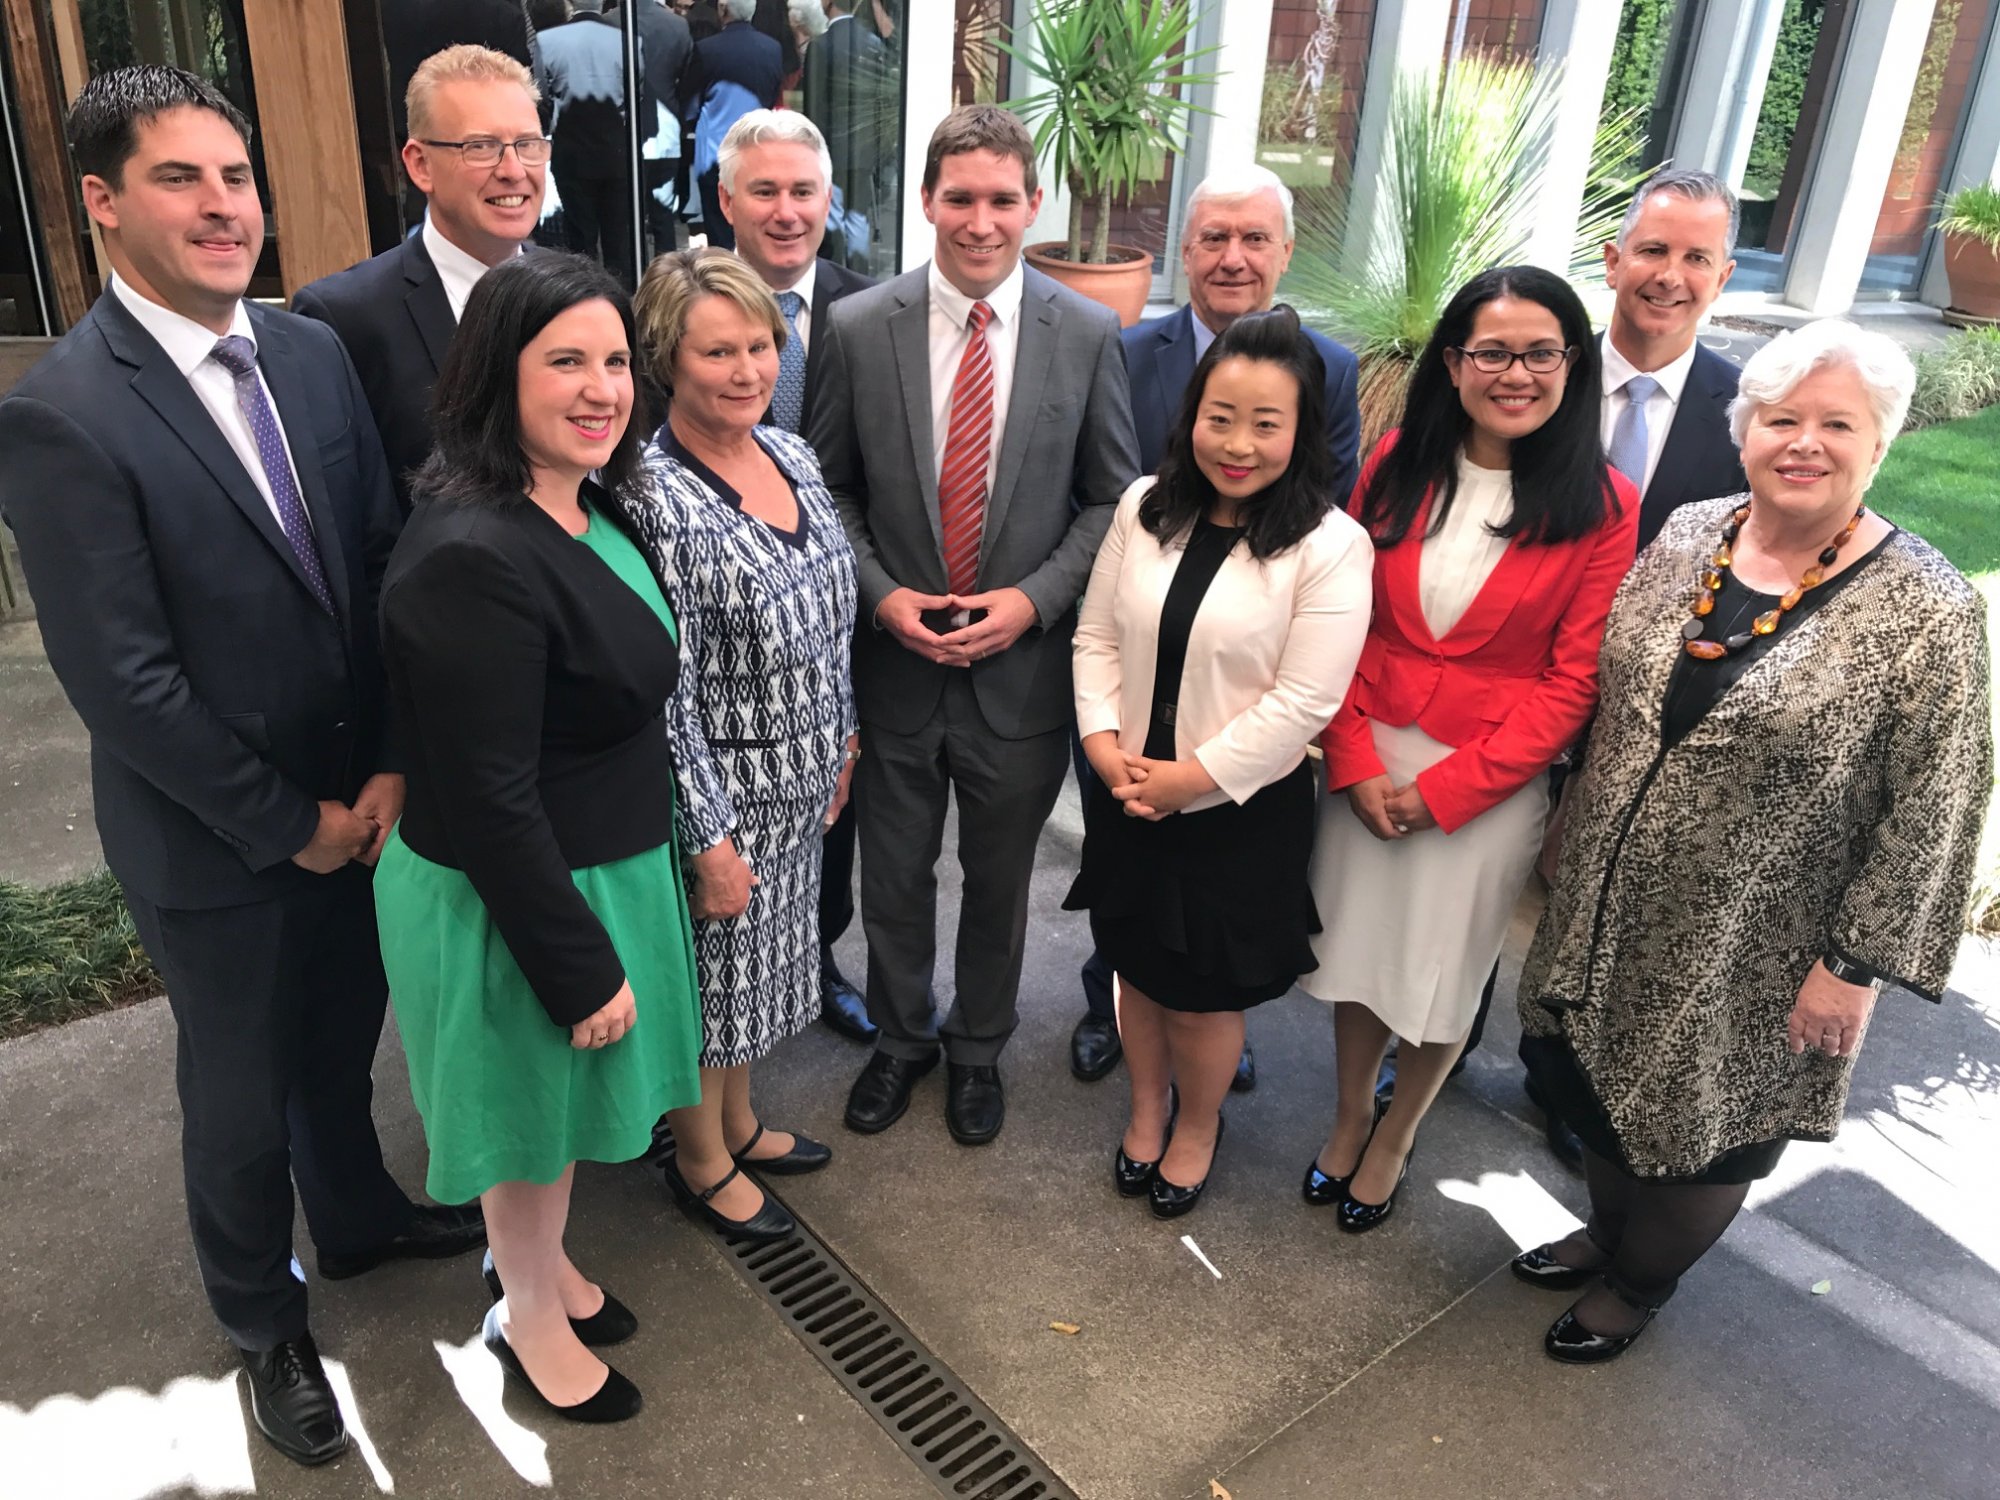 The Shadow Cabinet, which consists of all 11 Canberra Liberals MLAs. Photo: Charlotte Harper